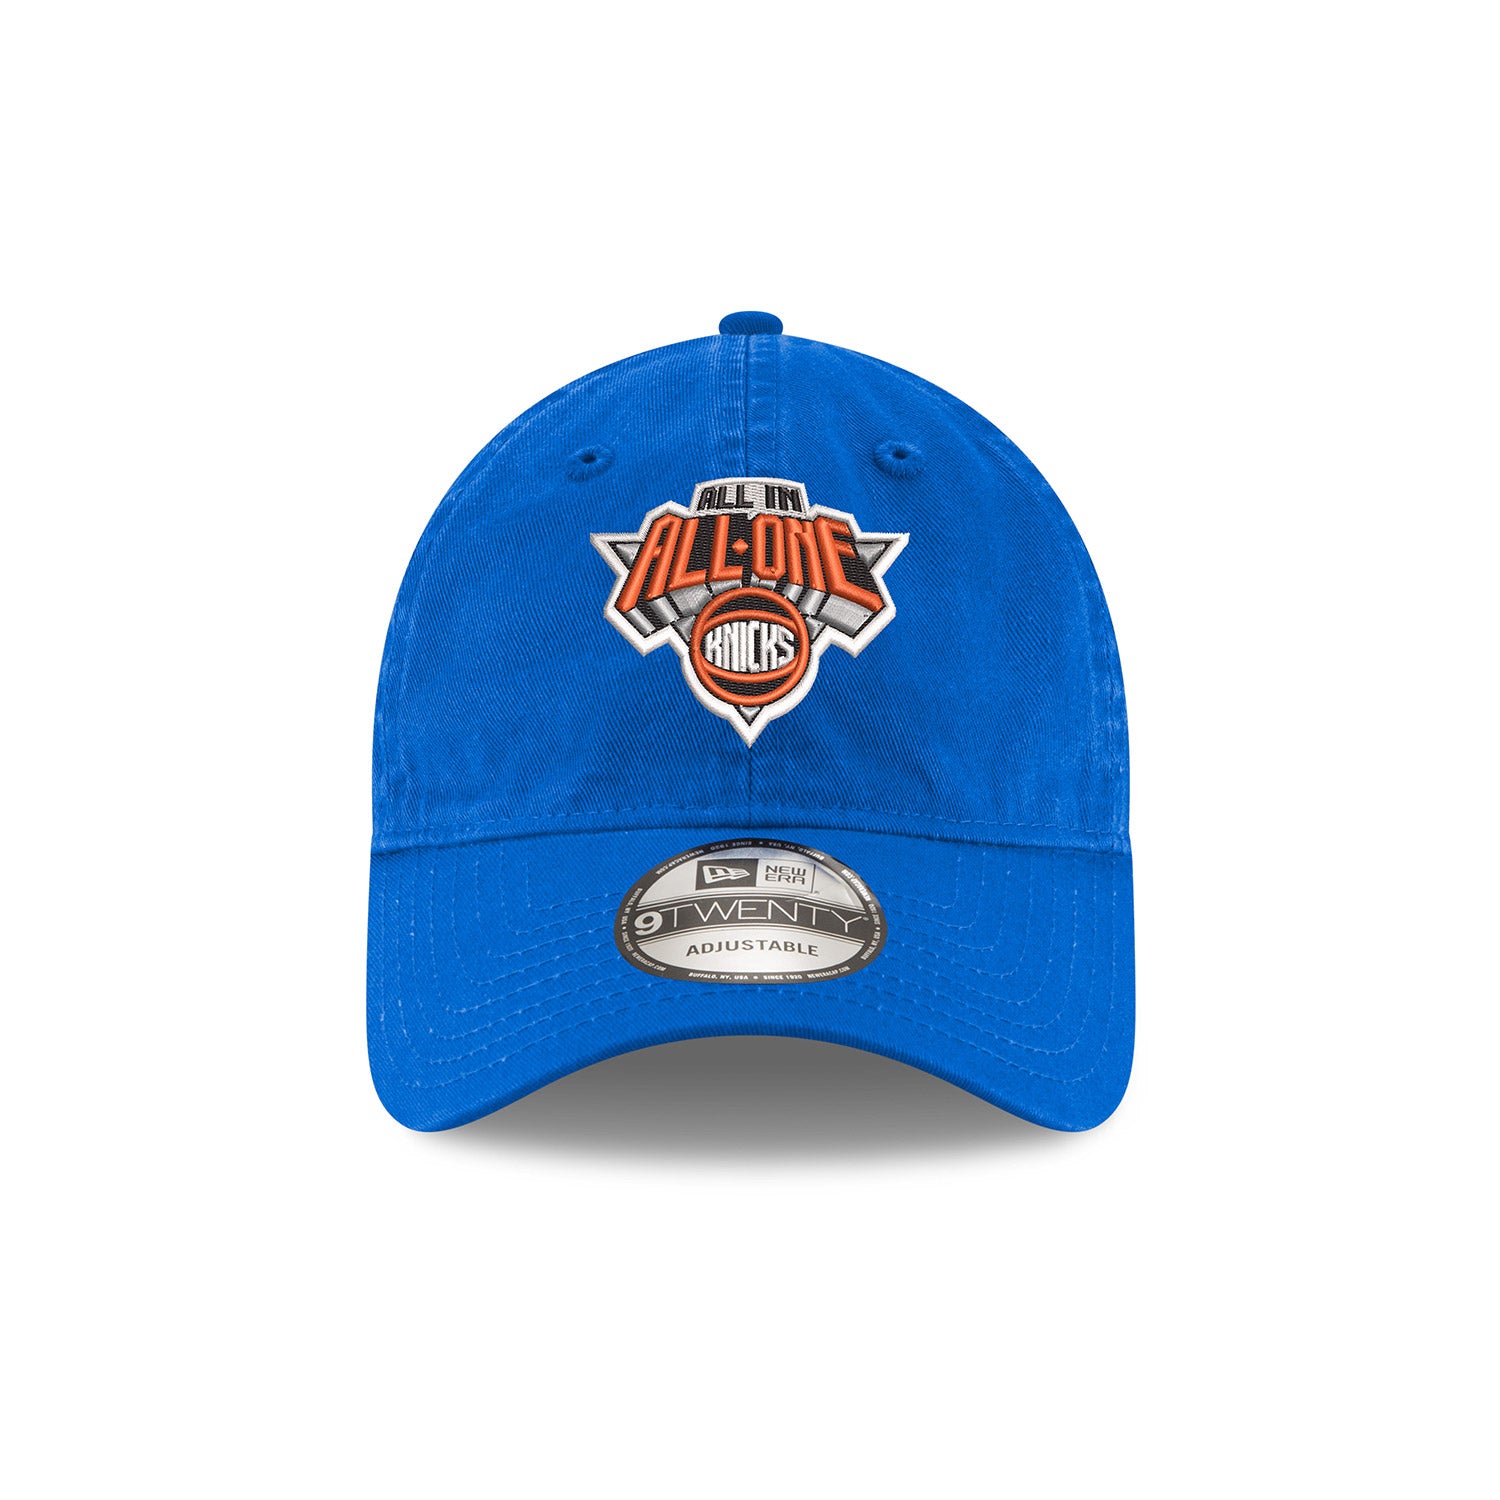 New Era Knicks 22-23 All in All One 920 Hat